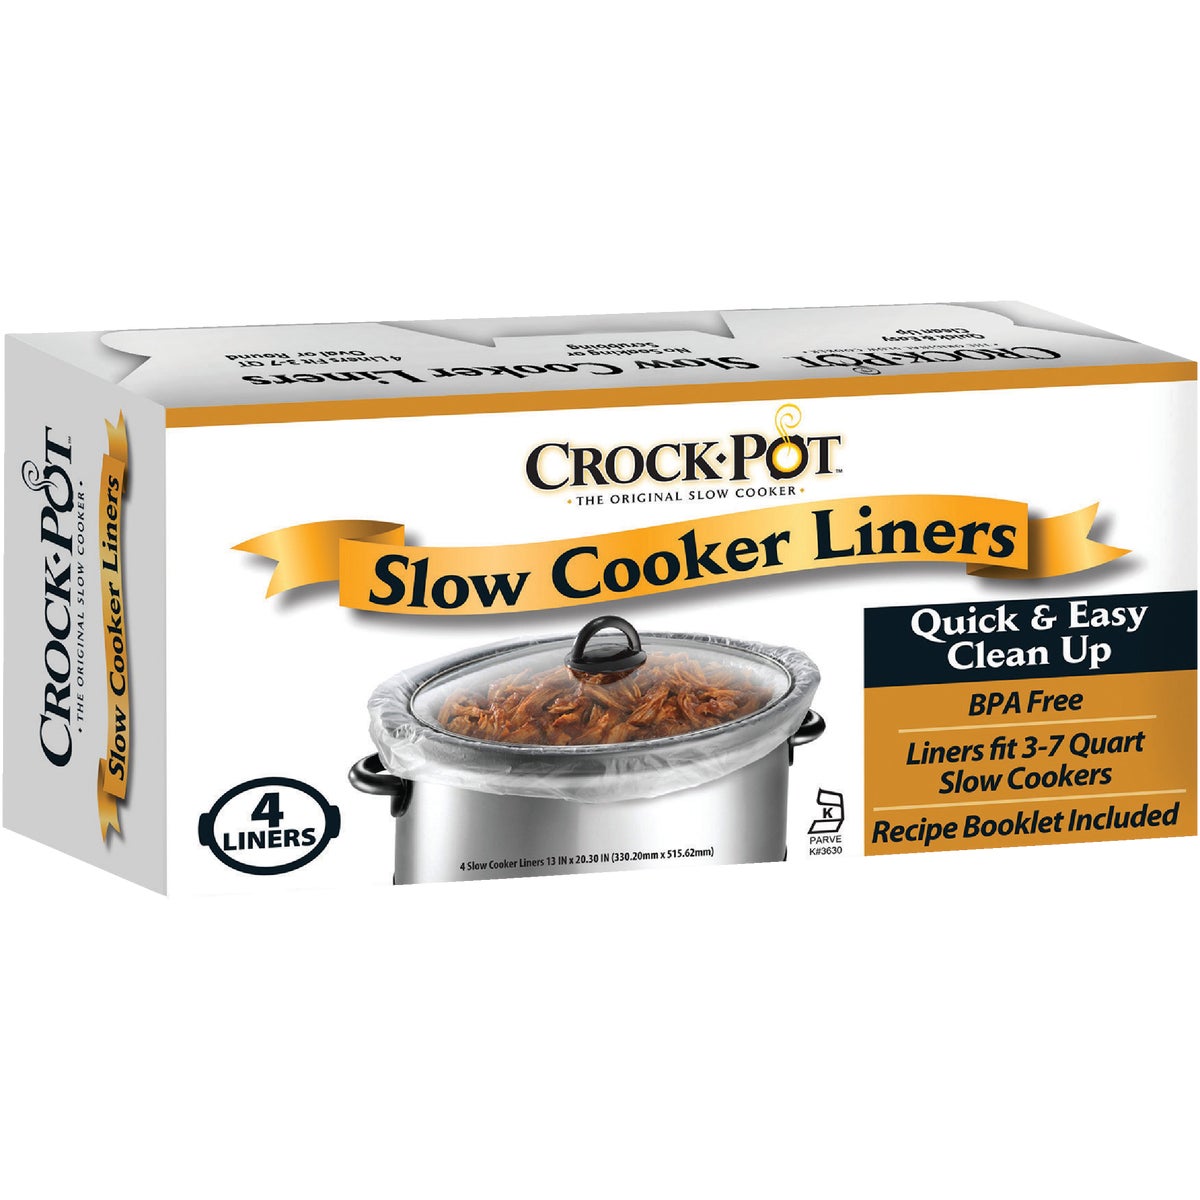 Item 601178, Liners fit 3 to 7 quart slow cookers for quick and easy cleanup.